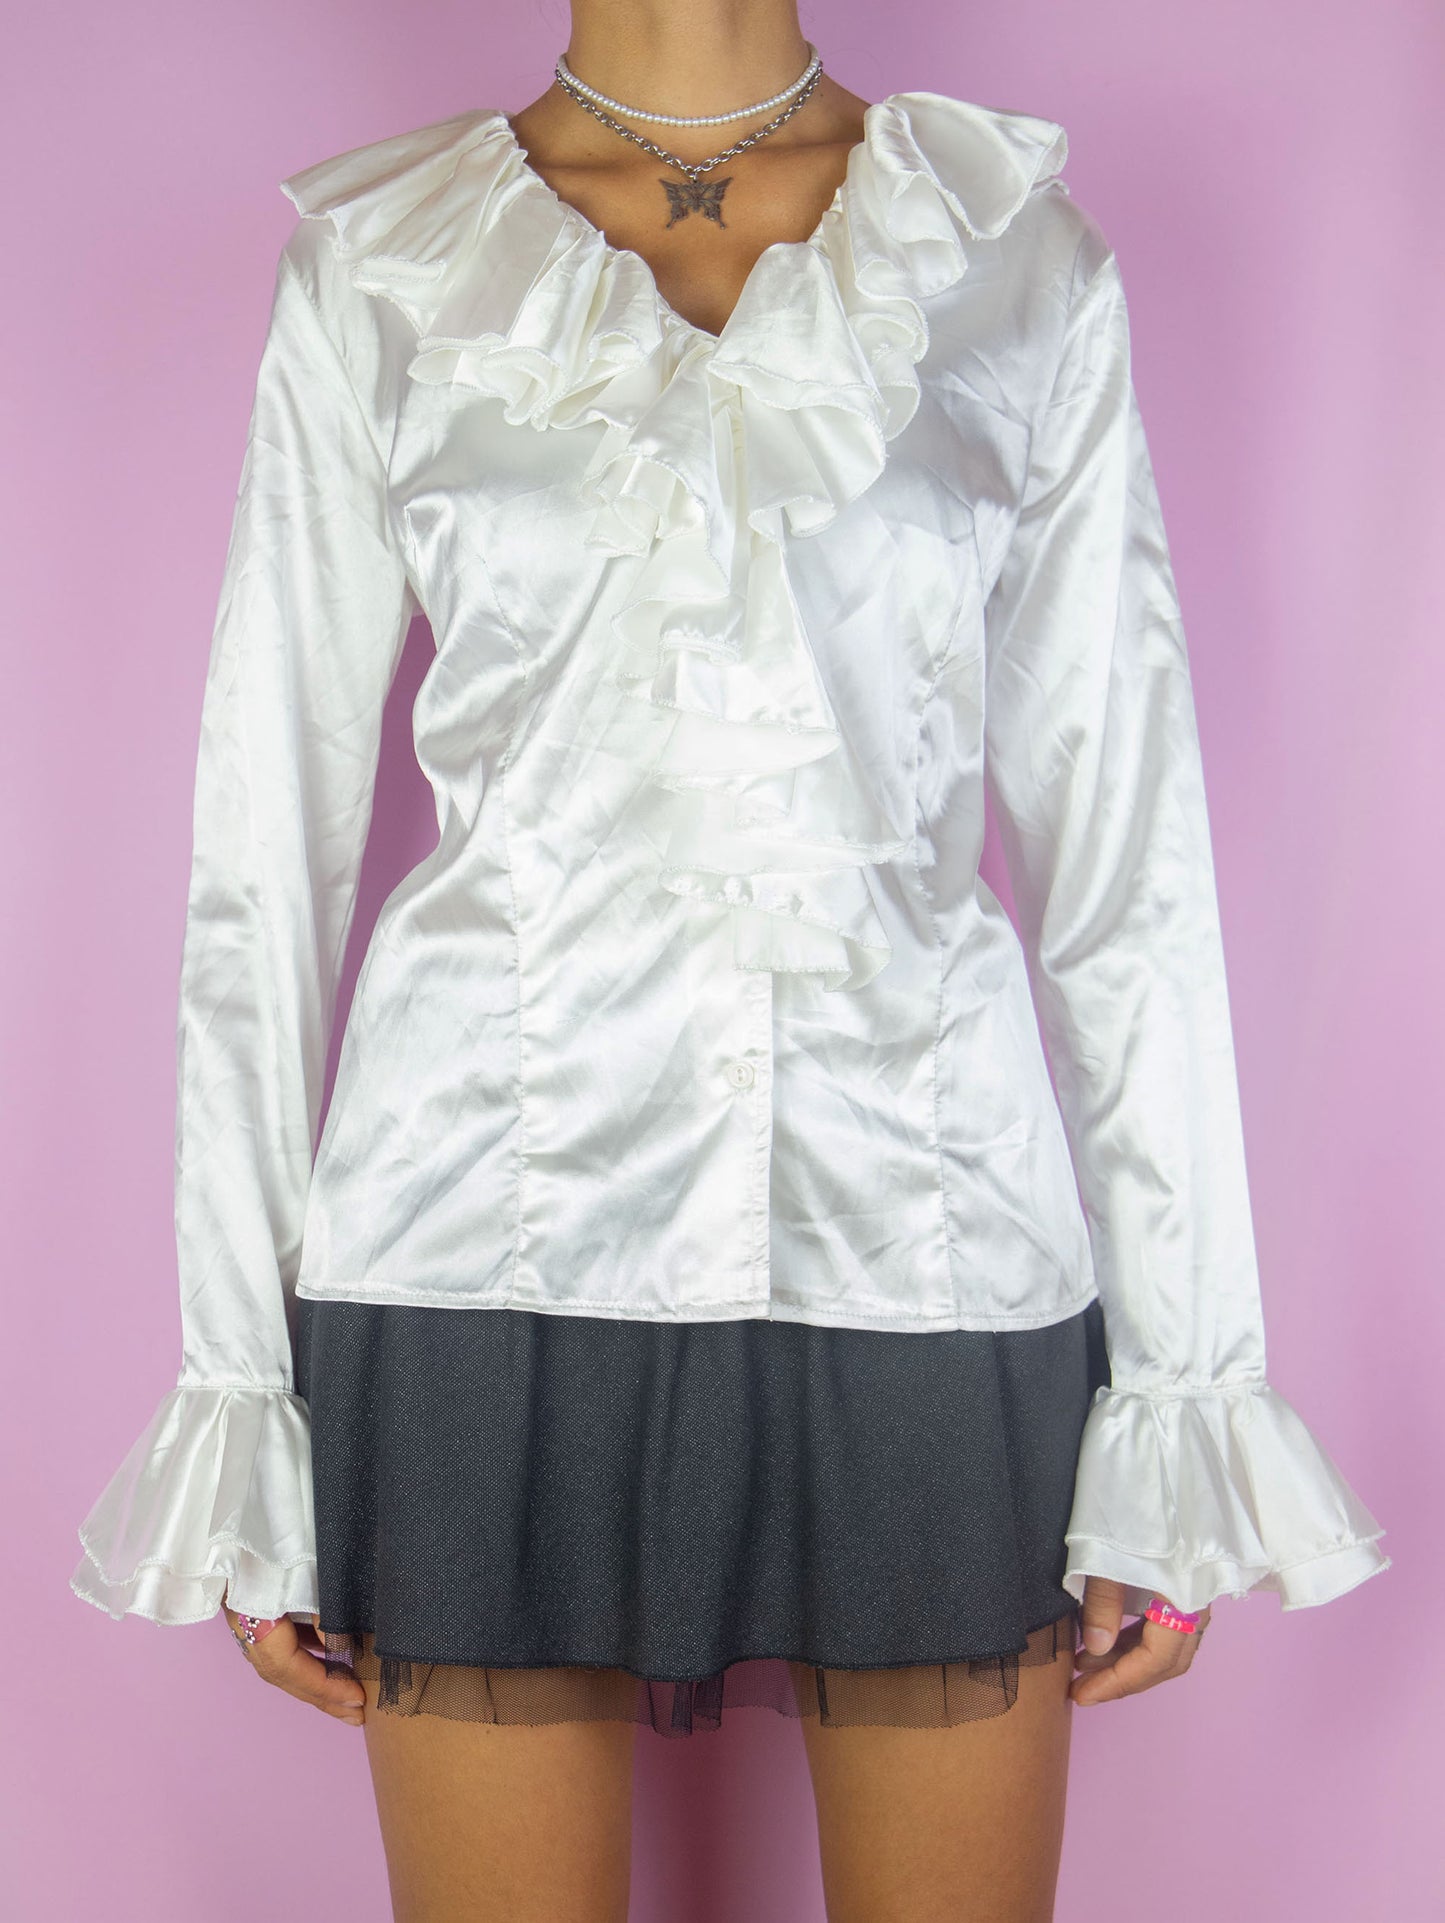 The Vintage 90s White Satin Ruffle Blouse is a shiny satin-style top with a ruffled collar, buttons, and bell sleeves. Romantic elegant 1990s evening party shirt.